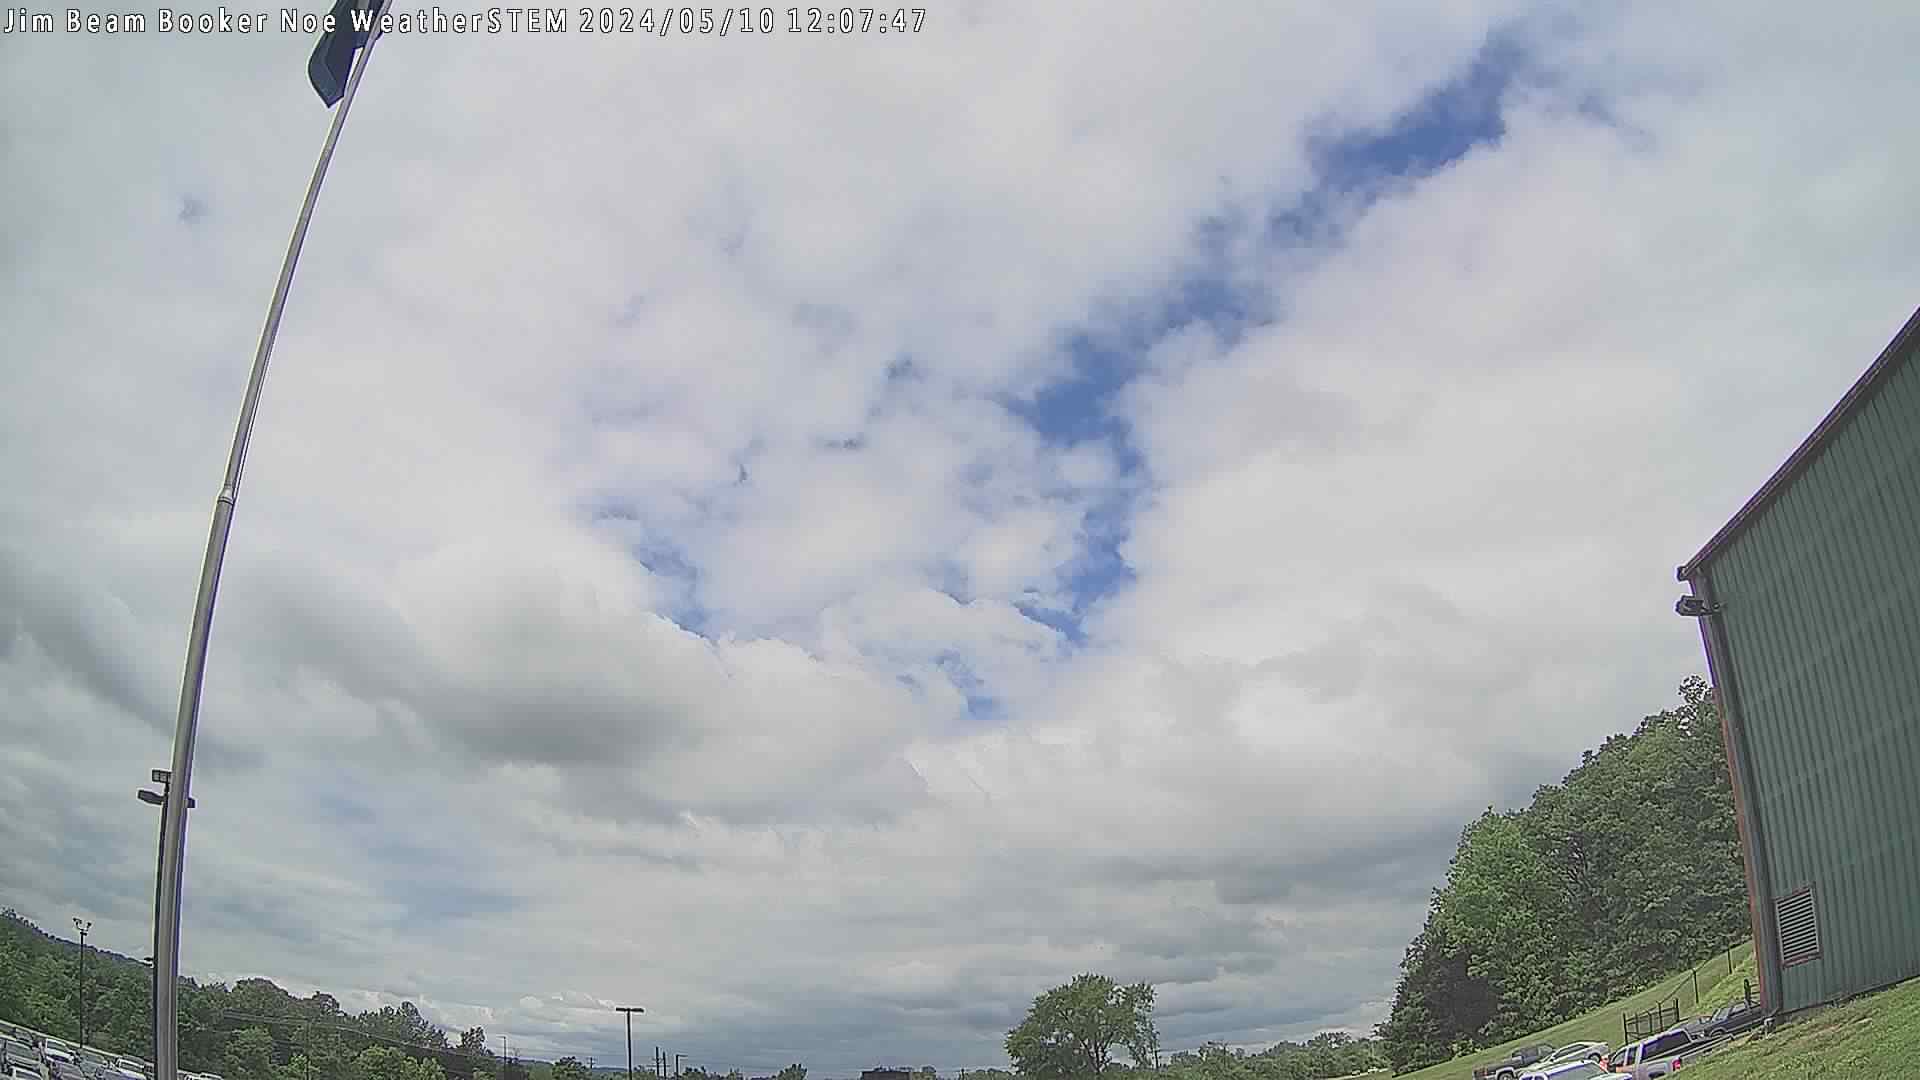  WeatherSTEM Cloud Camera null in Nelson County, Kentucky KY at Jim Beam Booker Noe